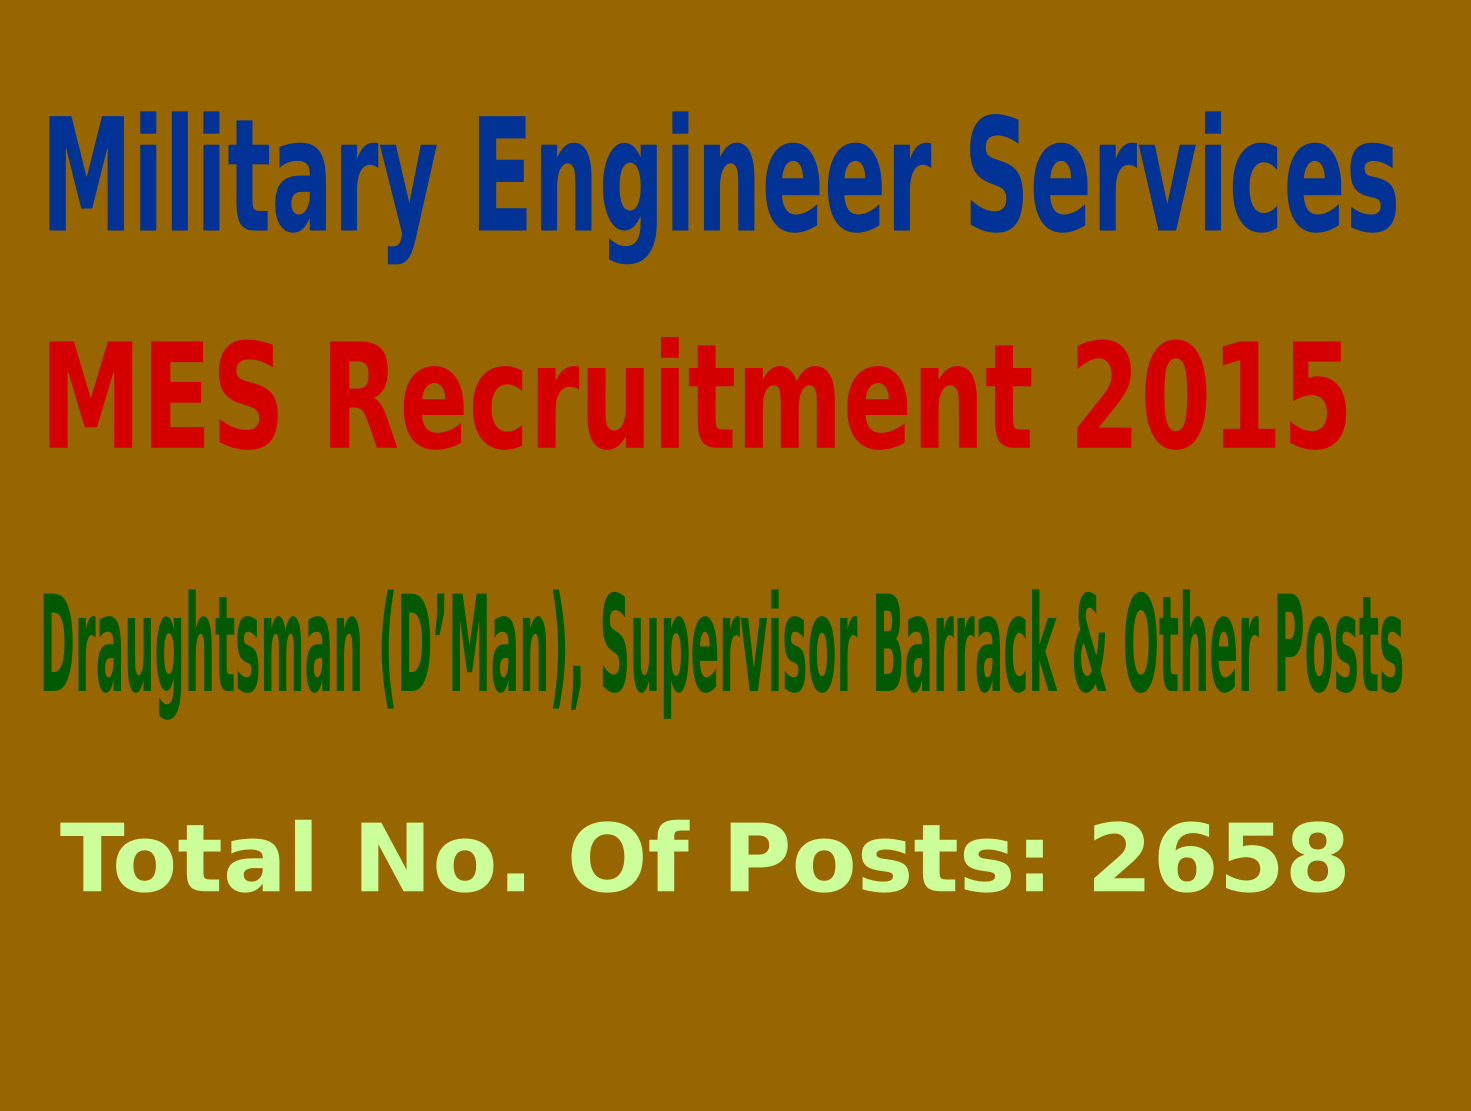 Military Engineer Services (MES) Recruitment 2015 For 2658 Draughtsman (D’Man), Supervisor Barrack & Other Posts